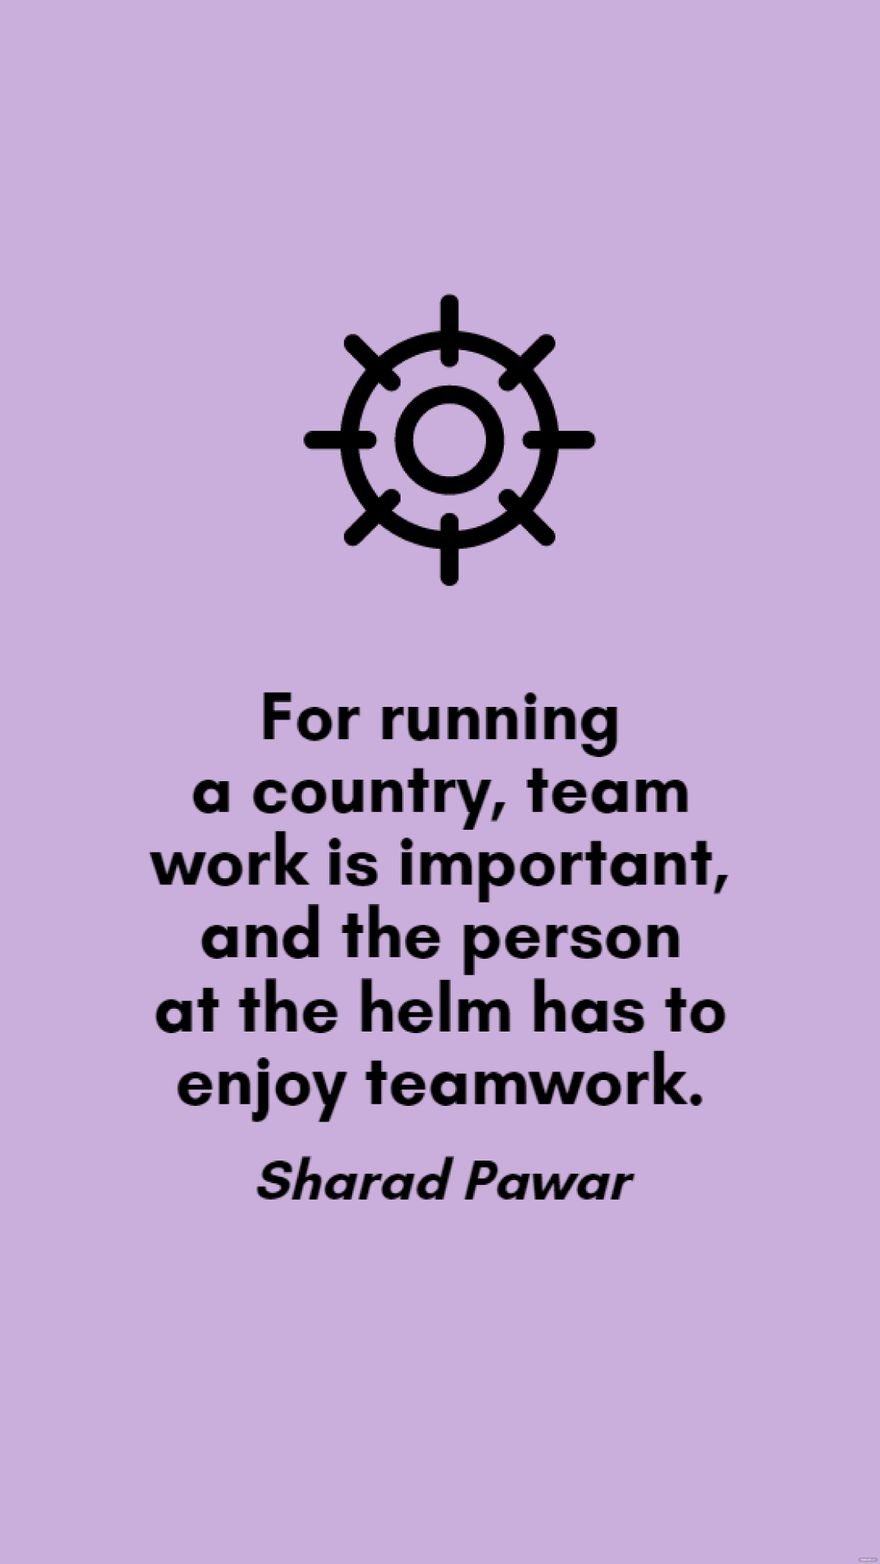 Free Sharad Pawar - For running a country, team work is important, and the person at the helm has to enjoy teamwork.